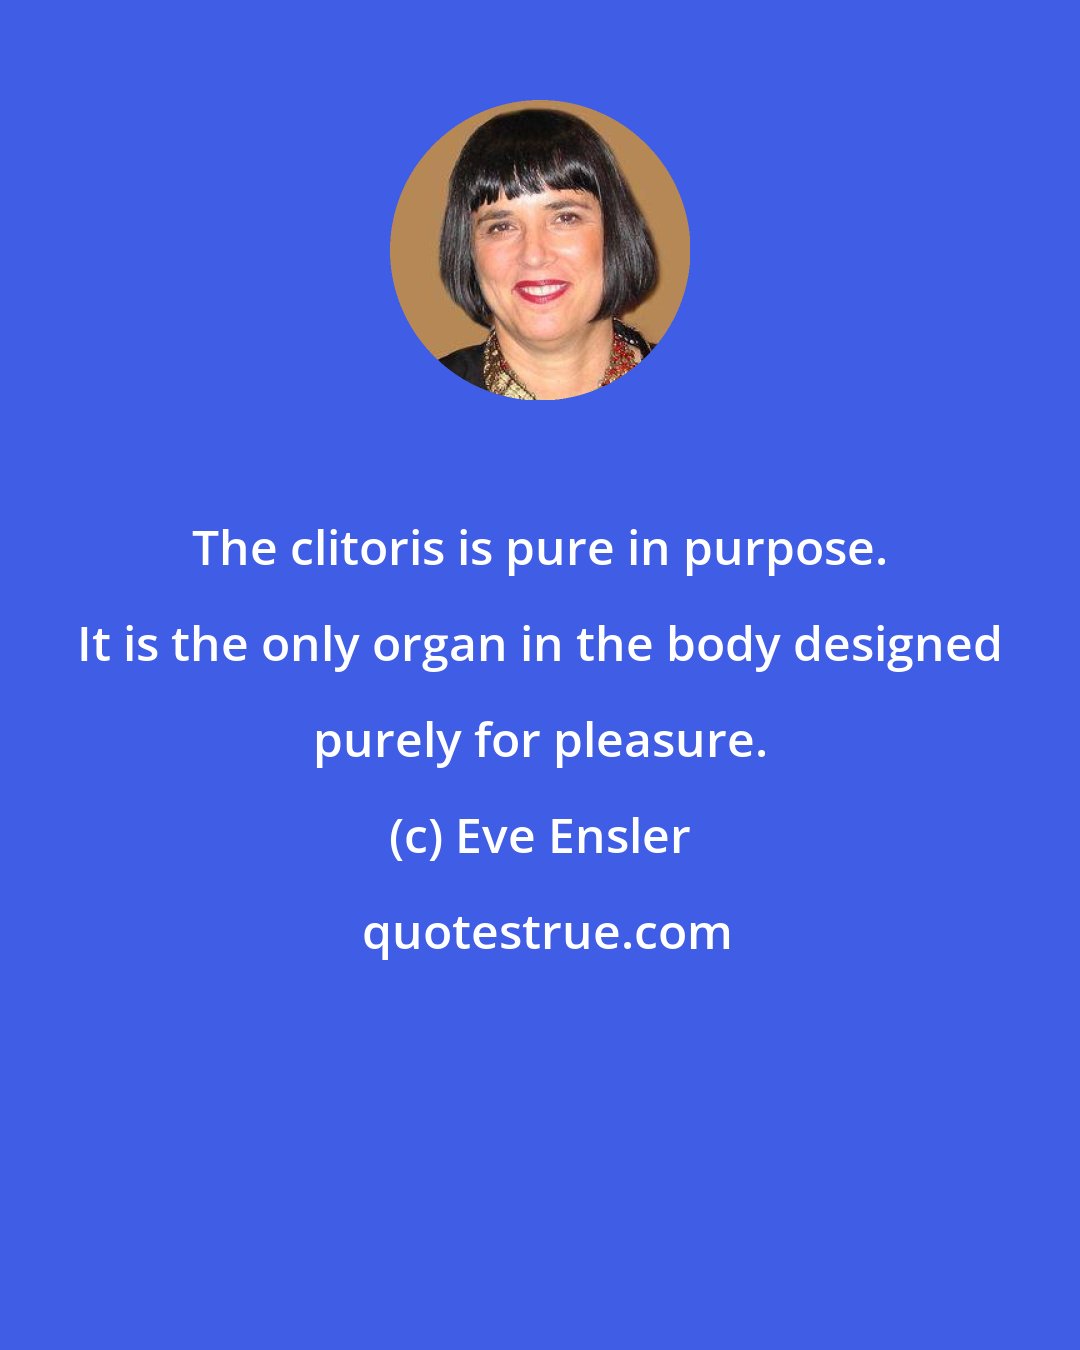 Eve Ensler: The clitoris is pure in purpose. It is the only organ in the body designed purely for pleasure.